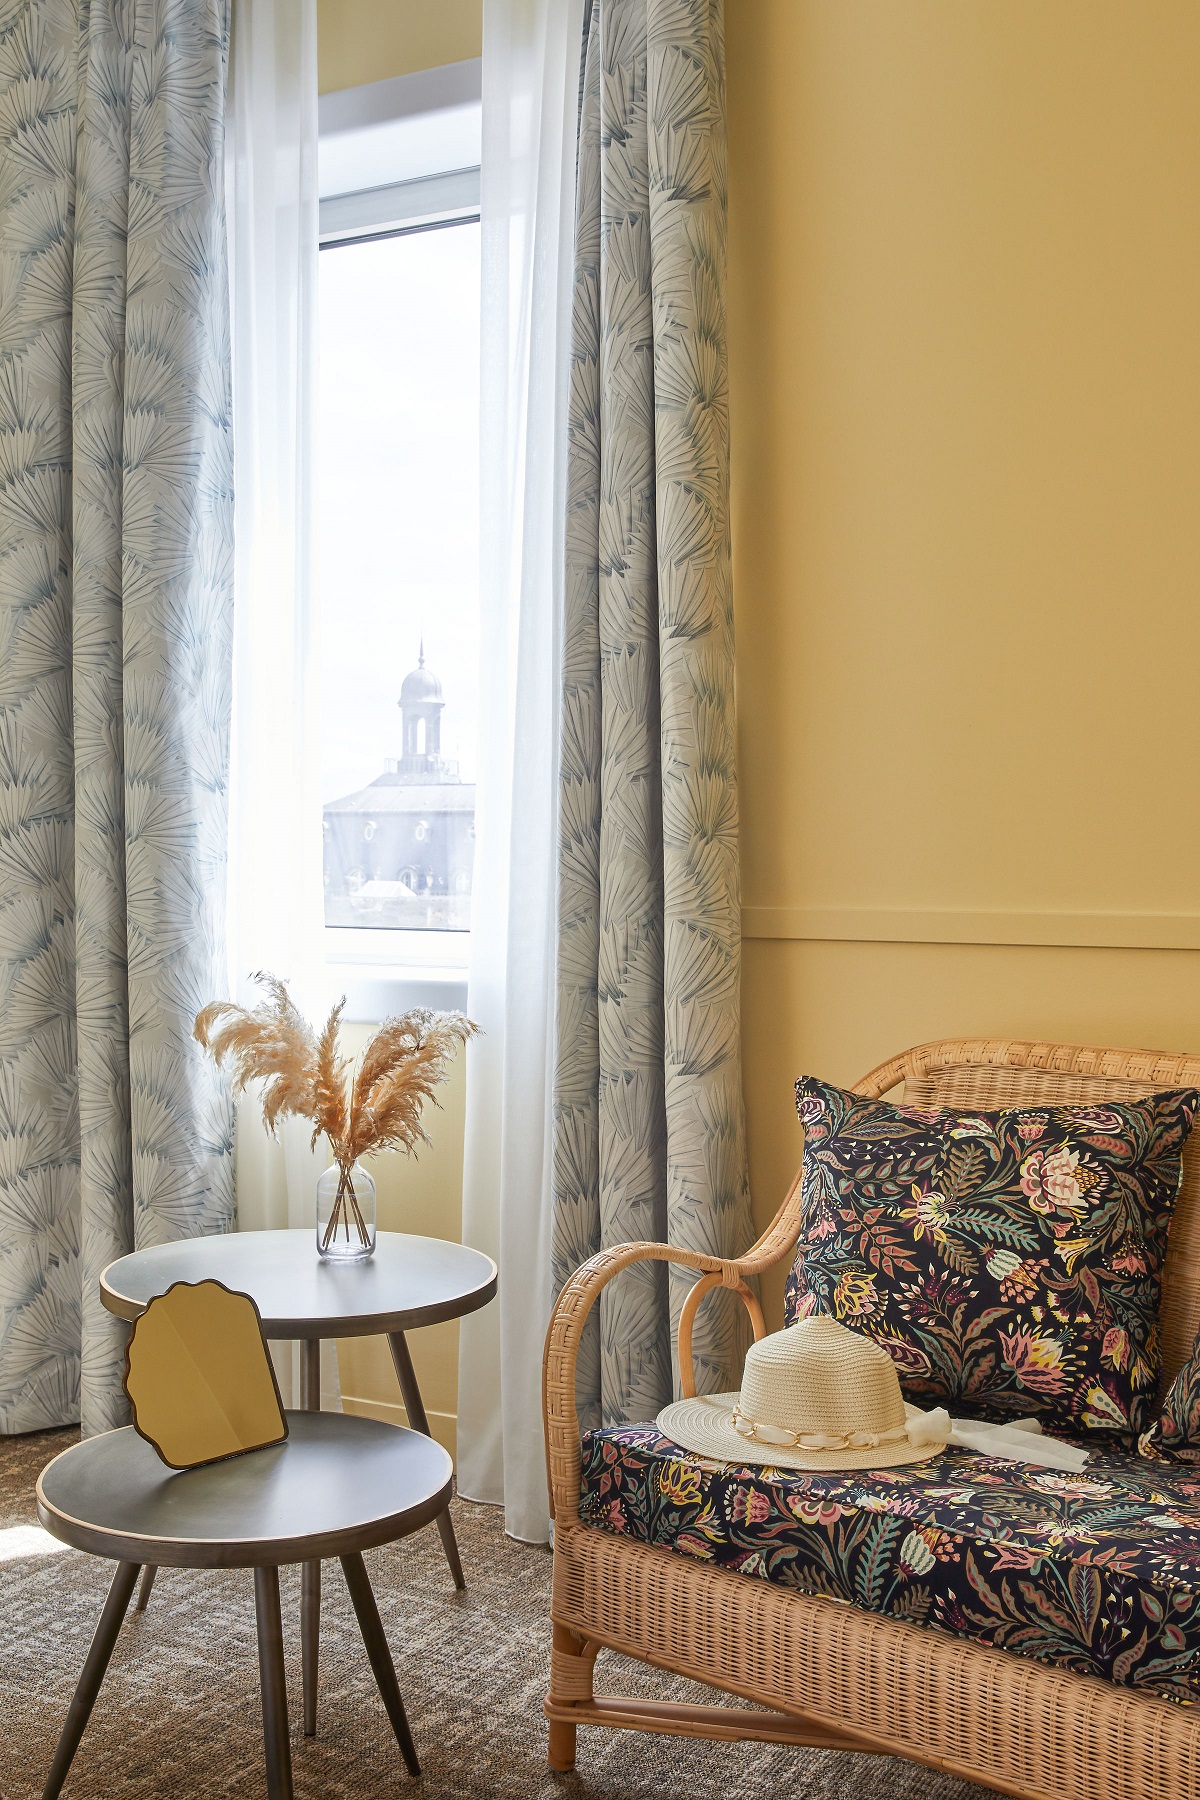 two round retro sidetables next to a wicker chair in floral upholstery with a hat on the seat